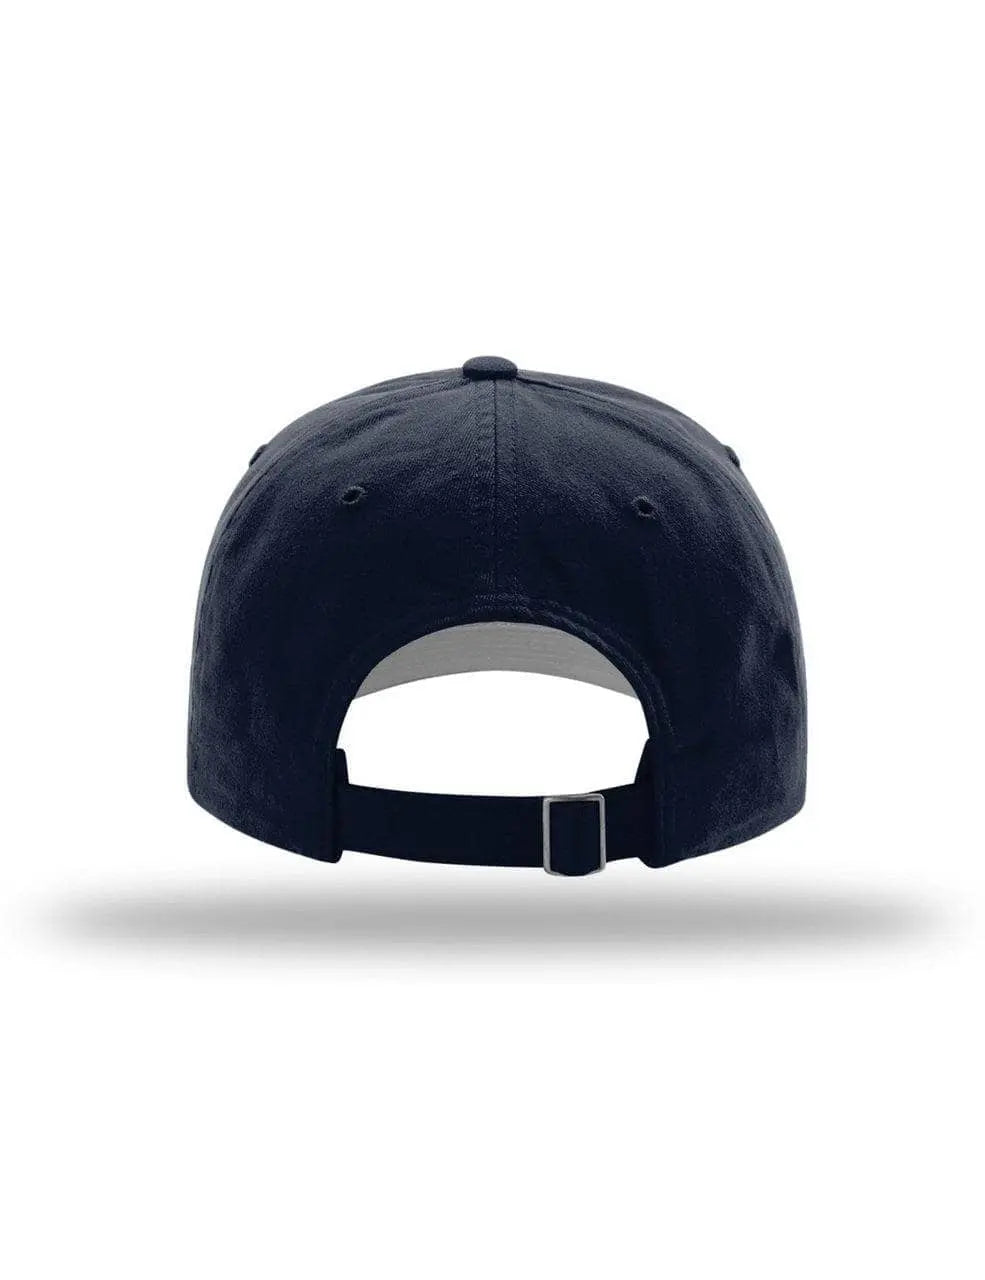 RICHARDSON - R55 DAD HAT - NAVY - Becker Safety and Supply